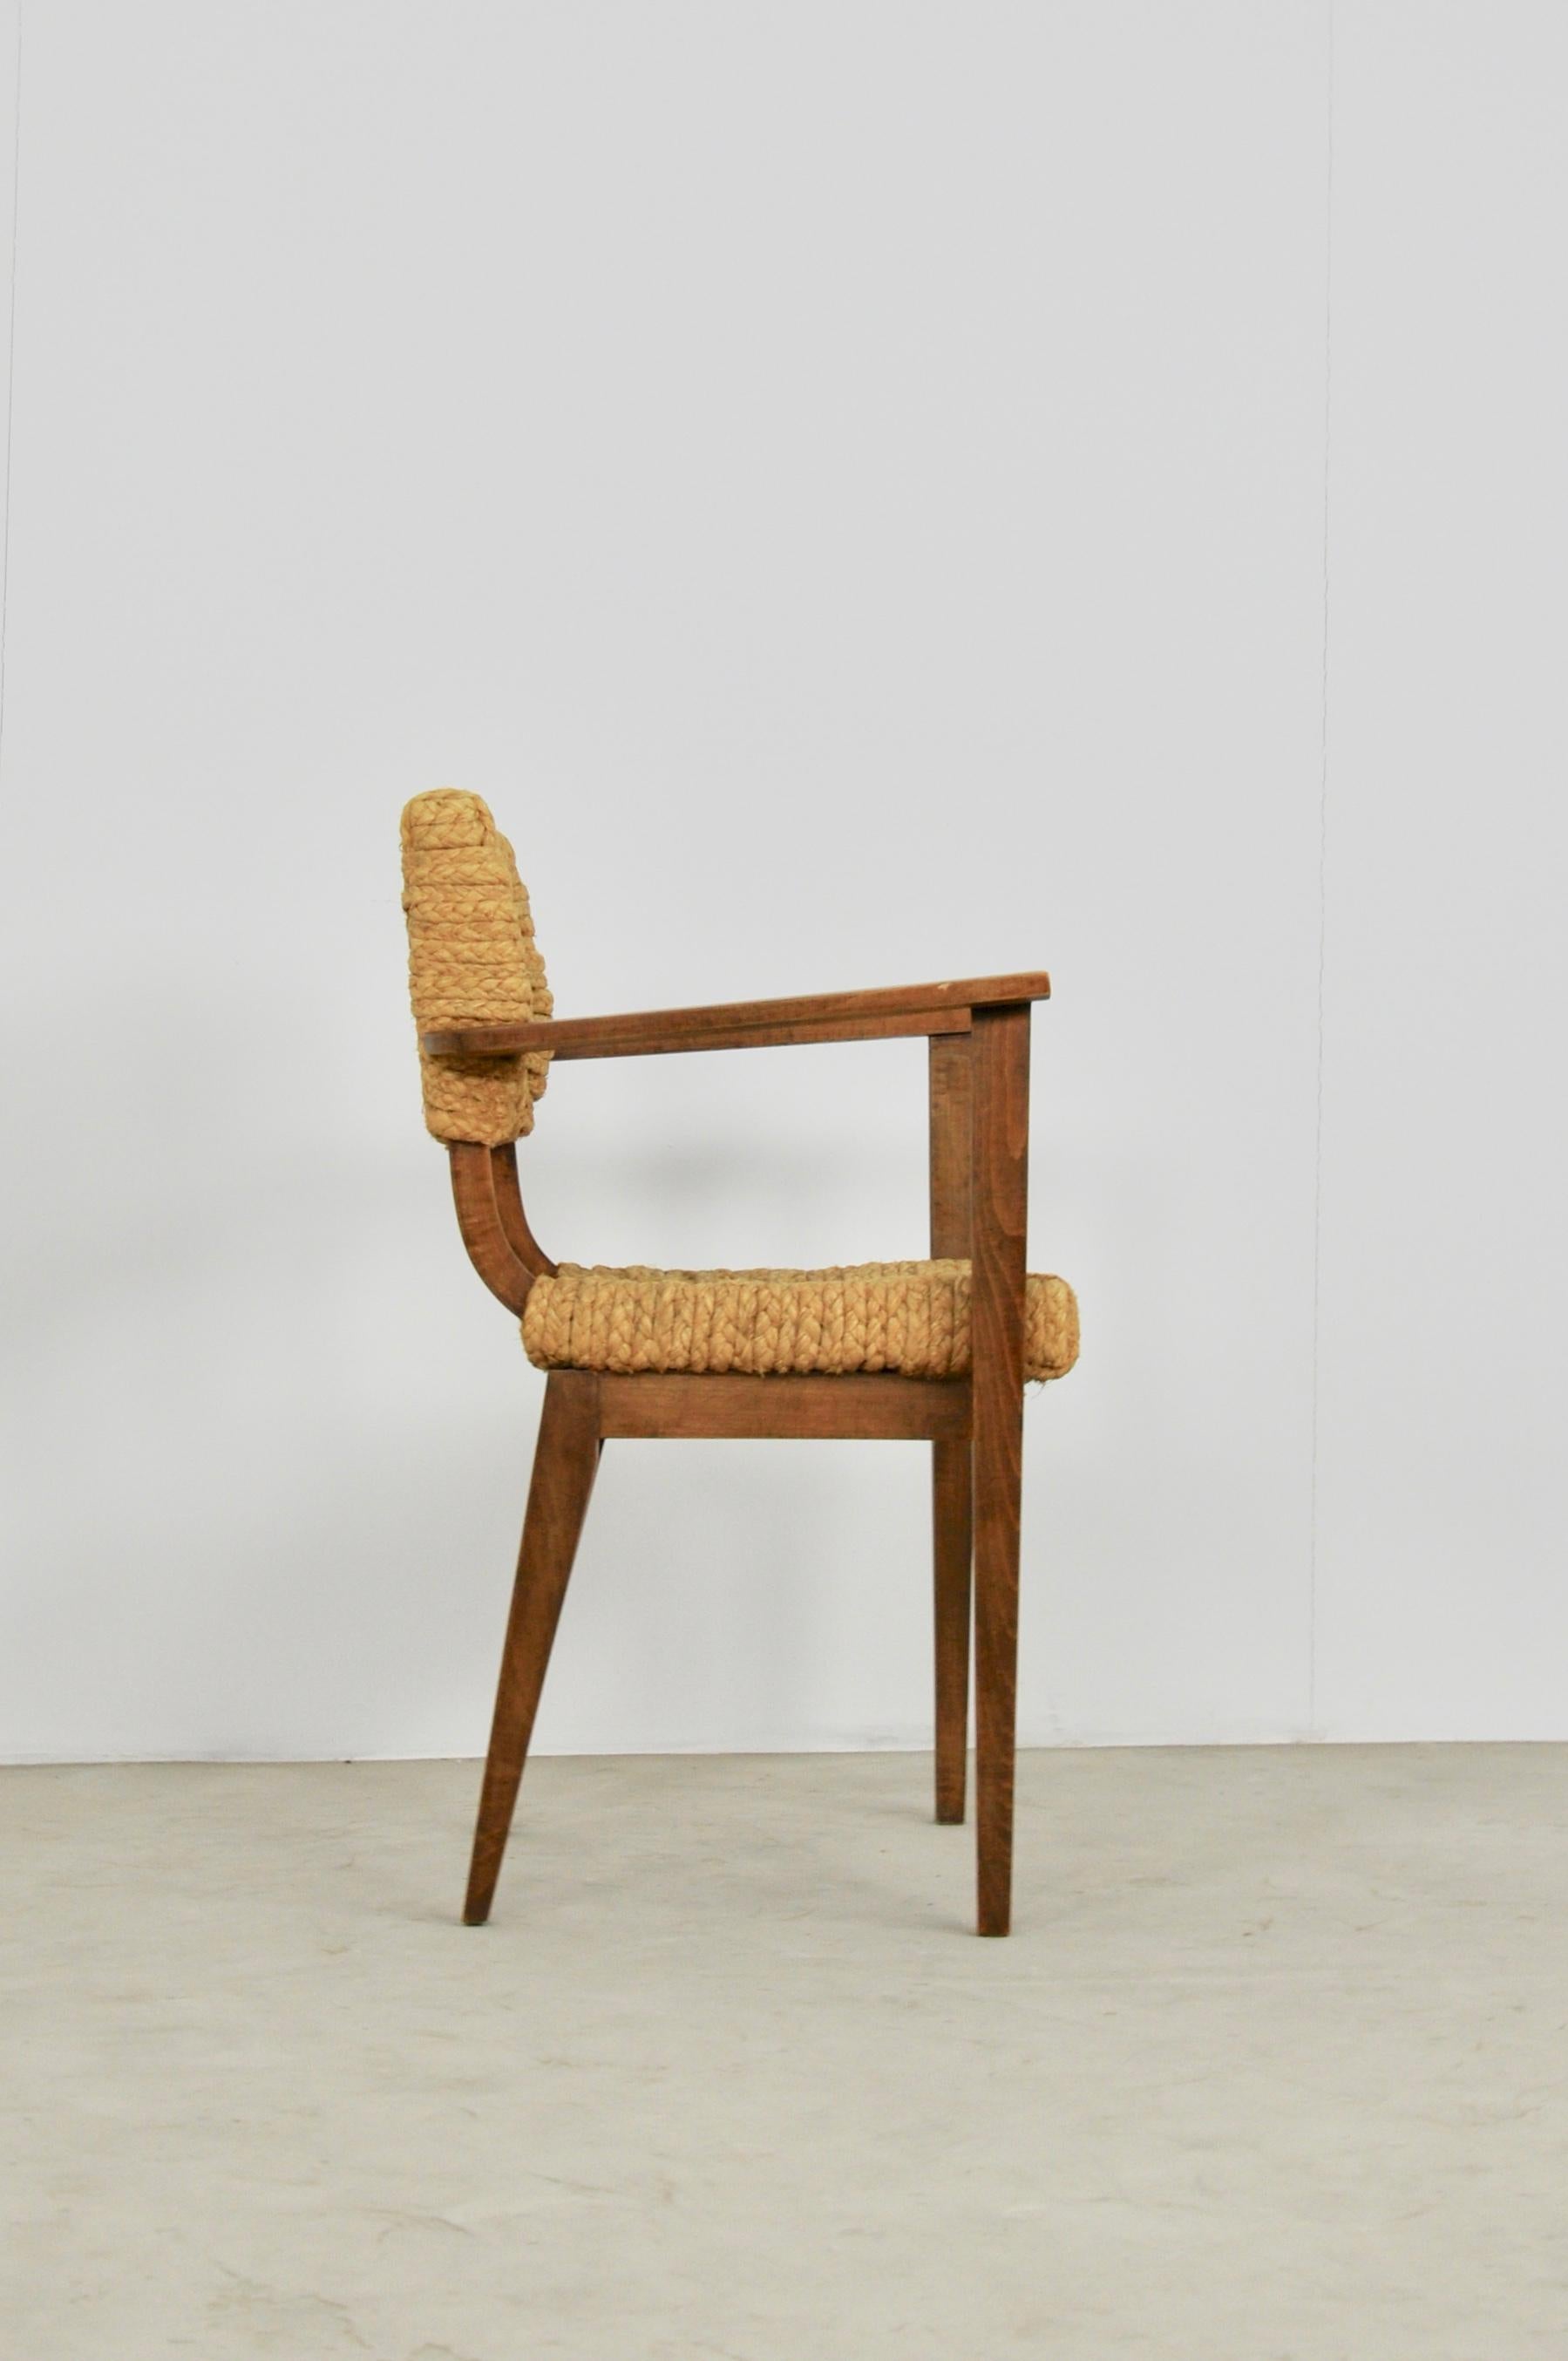 Wooden armchair and rope. Wear due to time and age of the chair.
Measure: Seat height 44cm.